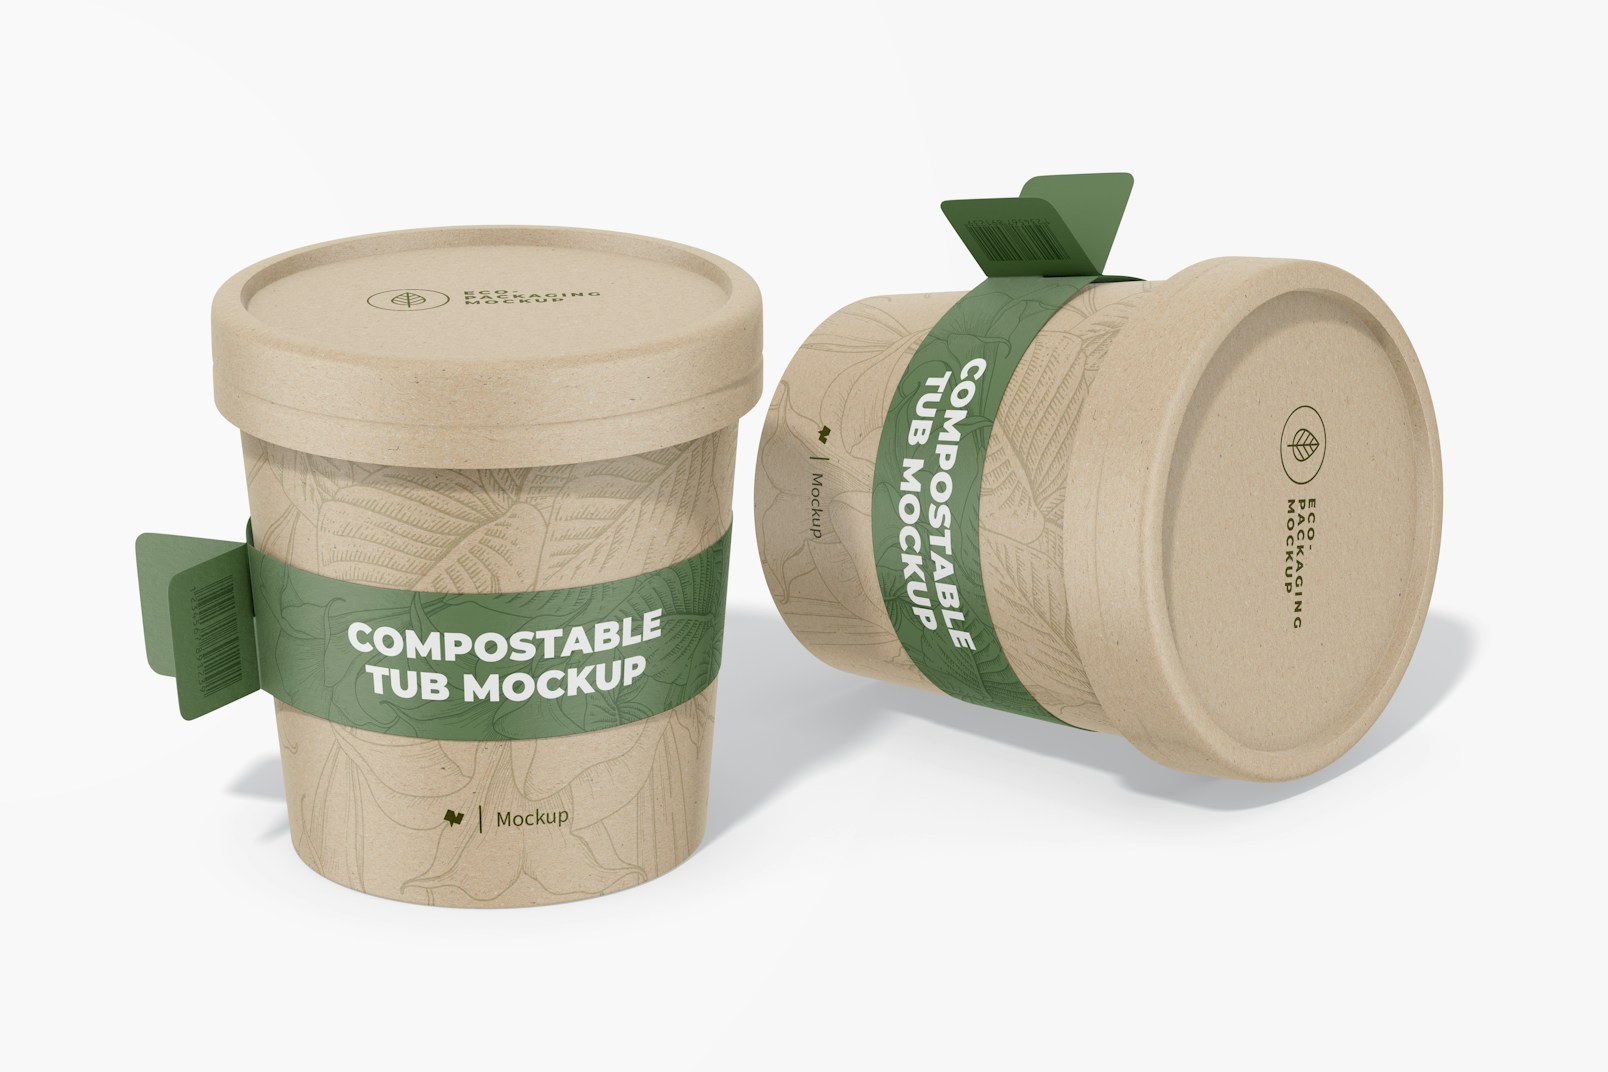 Compostable Tubs with Label Mockup, Standing and Dropped